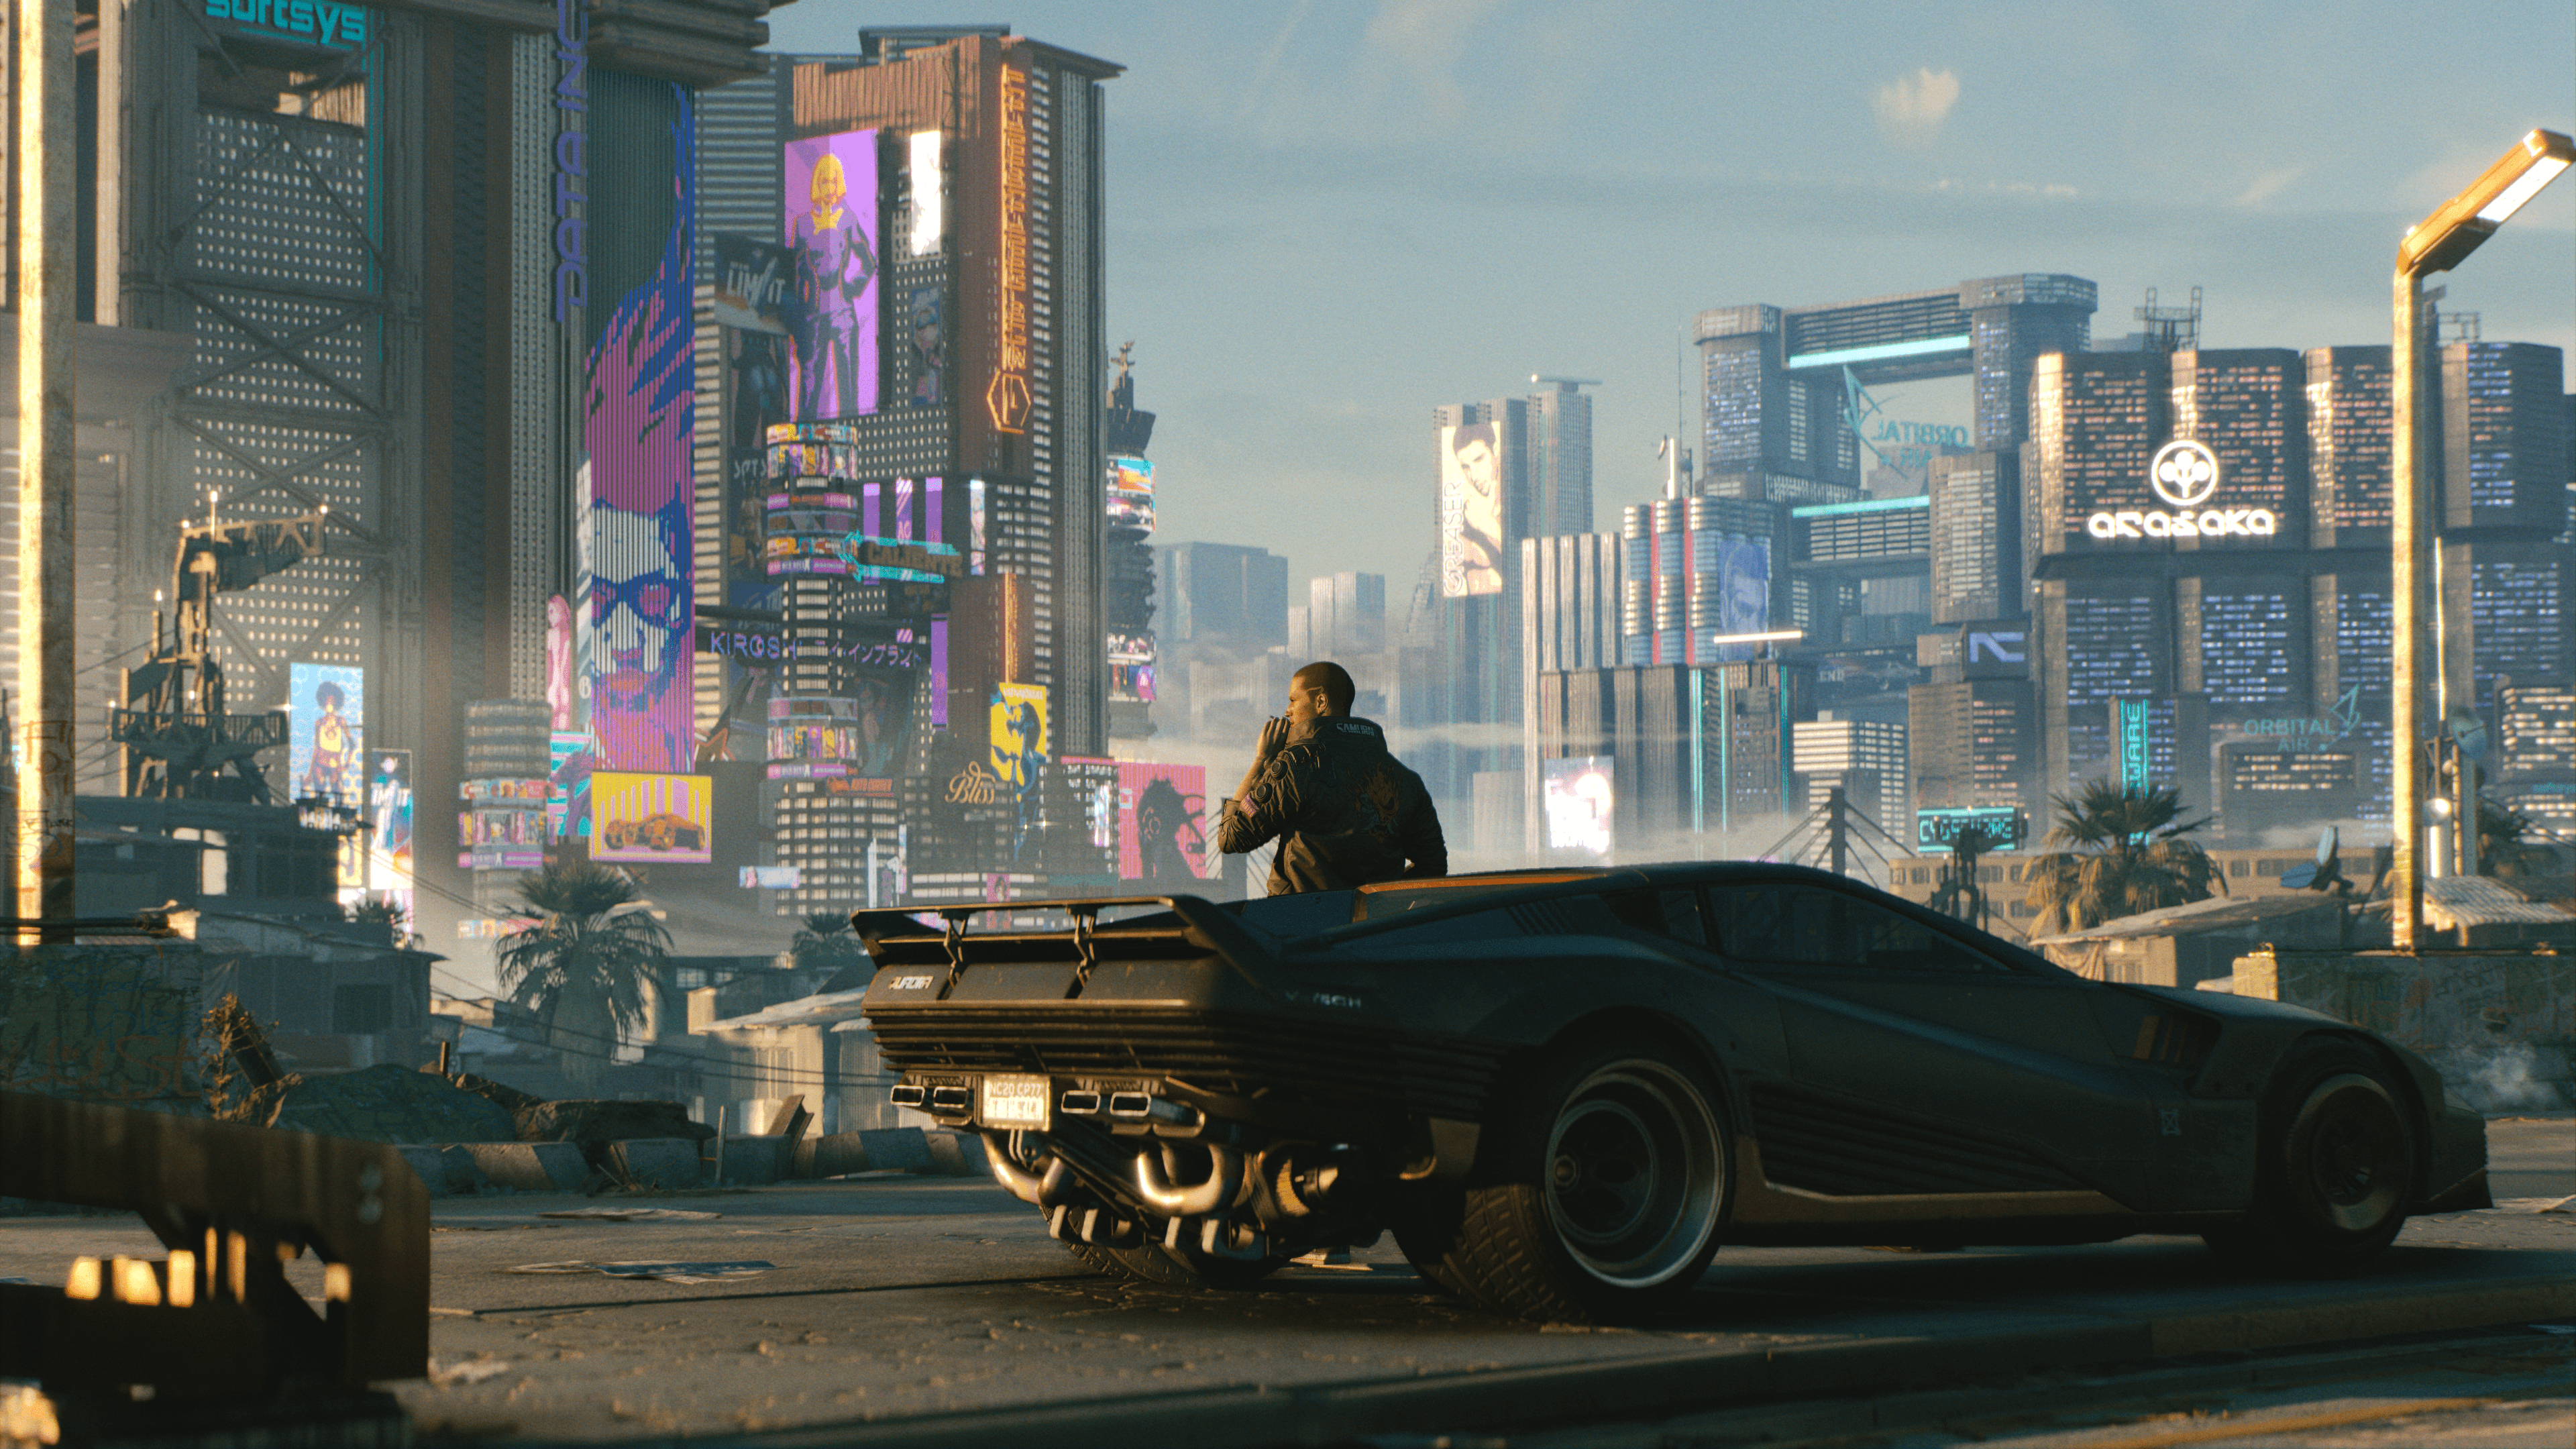 Cyberpunk 2077 Upgrade To Allow Crossover From PS4 To PS5.